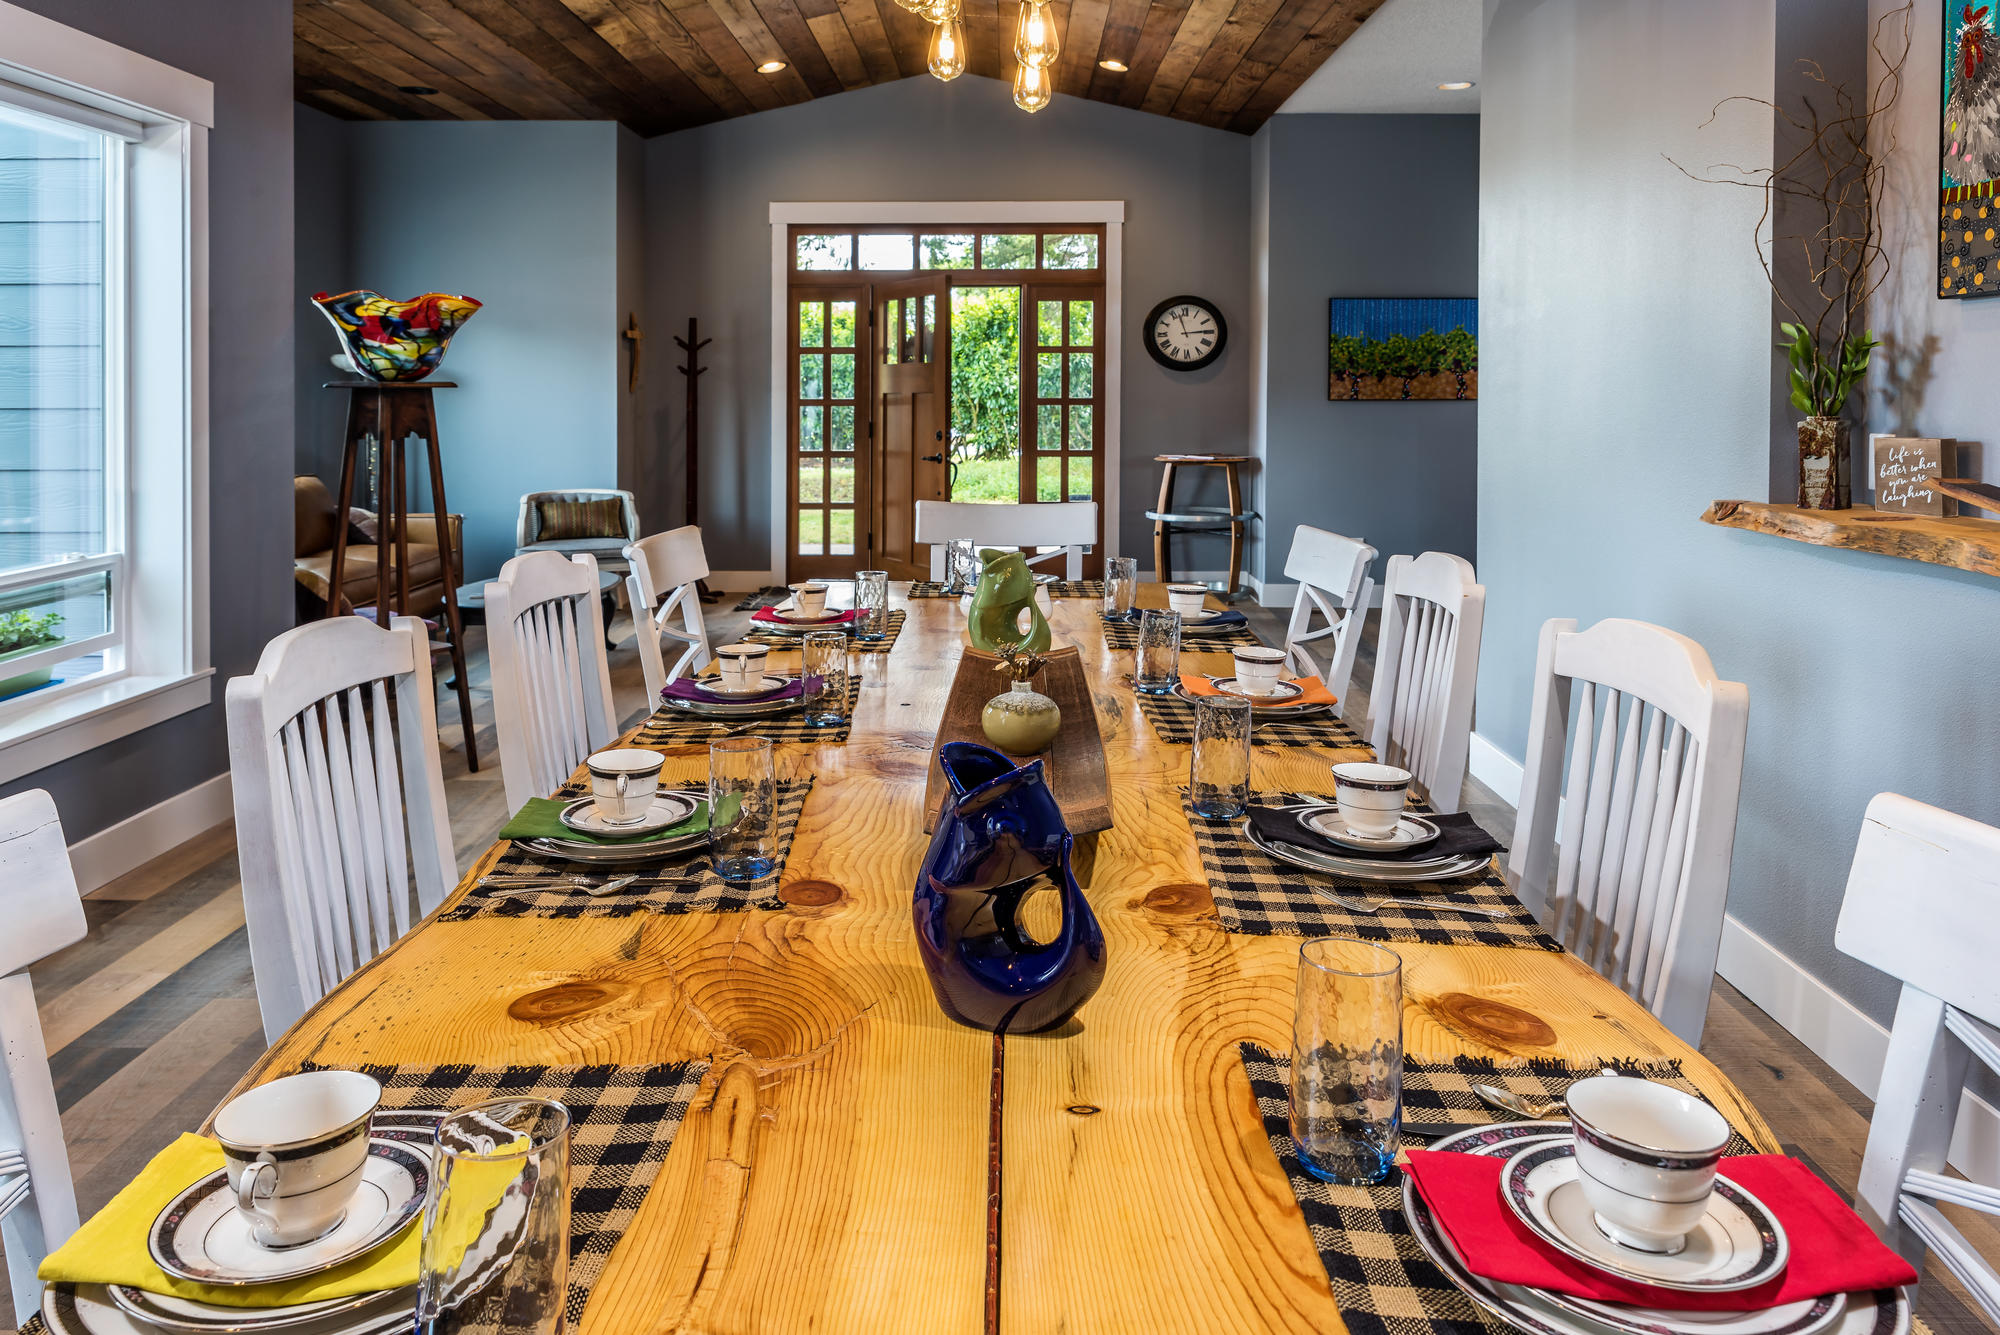 A long wood table with several colorful place settings.